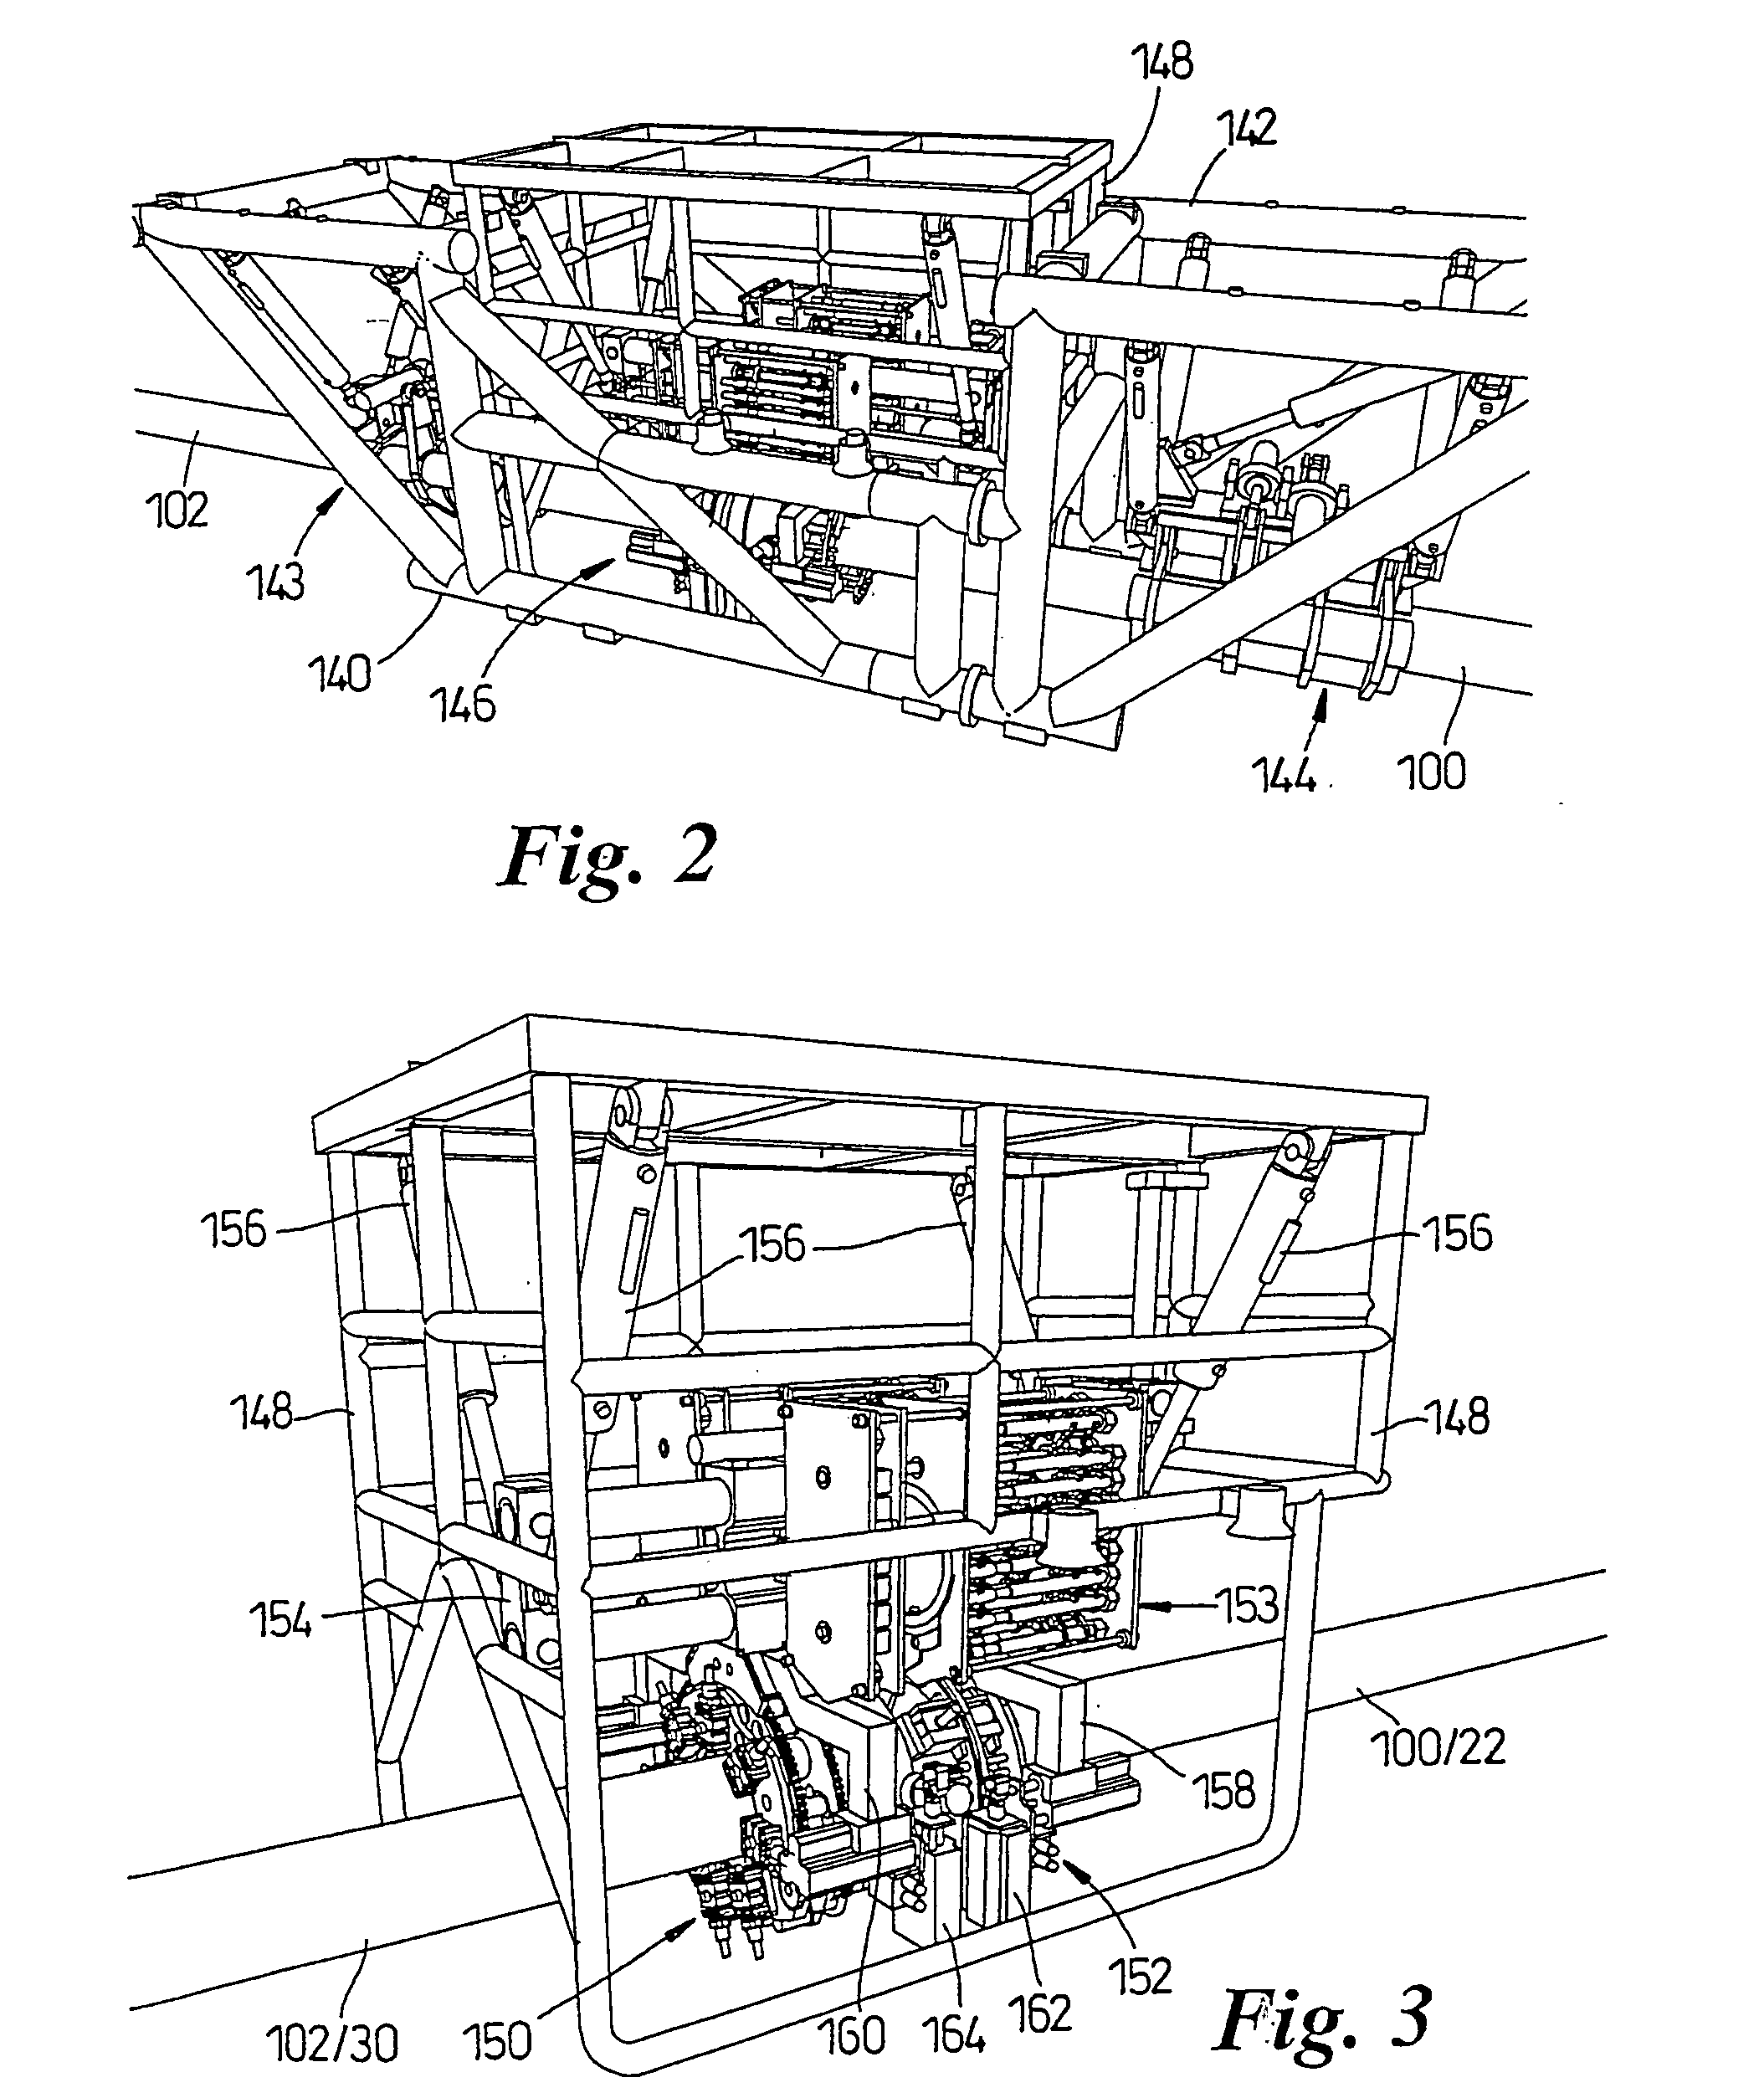 Remote bolted flange connection apparatus and methods of operation thereof